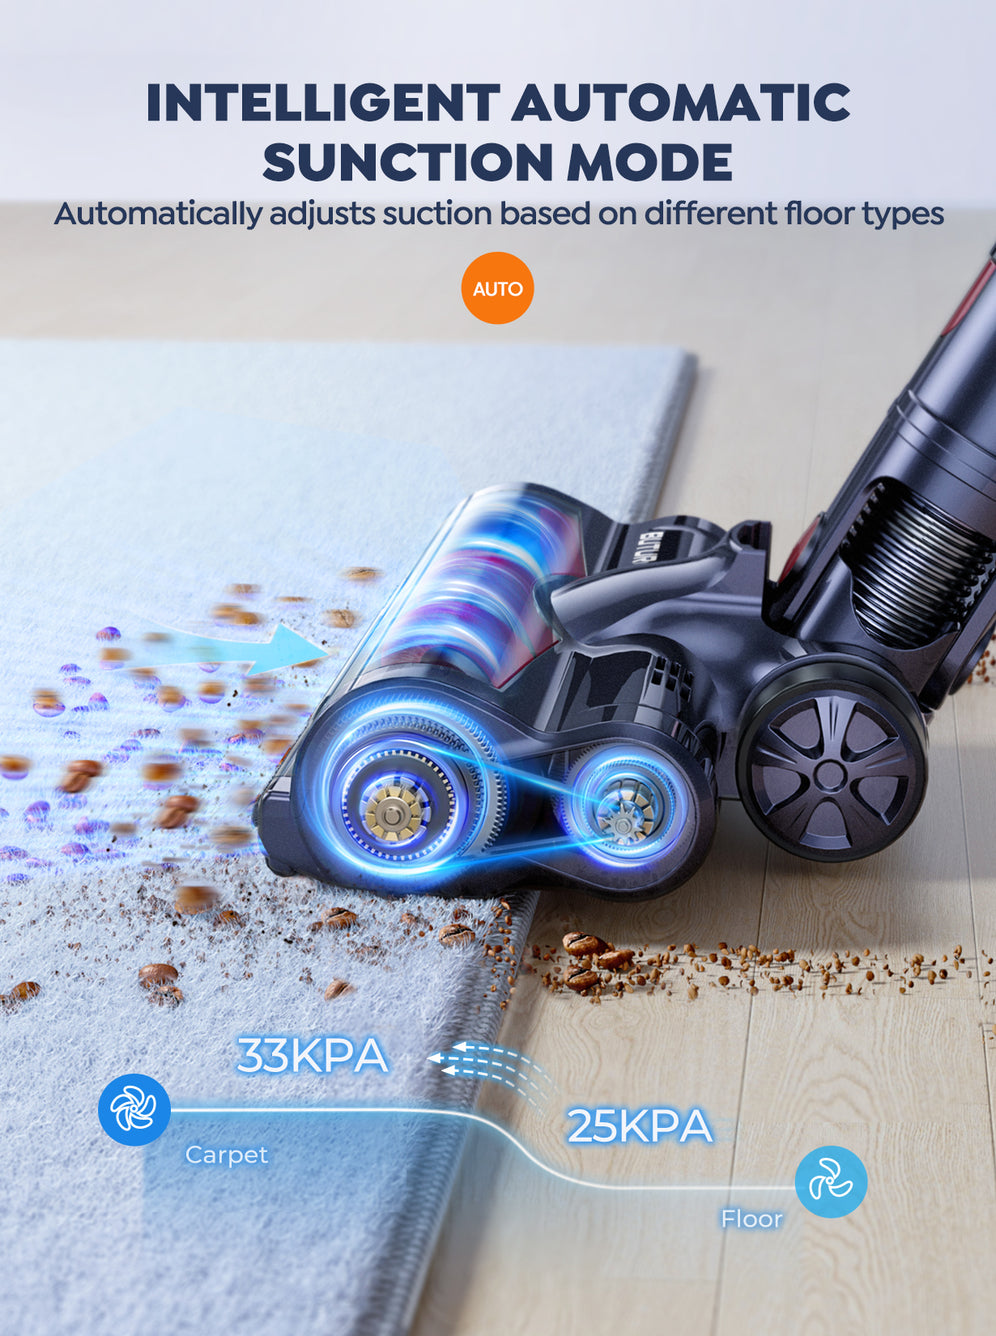 BuTure Cordless Vacuum Cleaner, 38Kpa 450W Stick Vacuum with Brushless  Motor, Anti-Tangle Vacuum Cleaner for Home, Automatically Adjust Suction